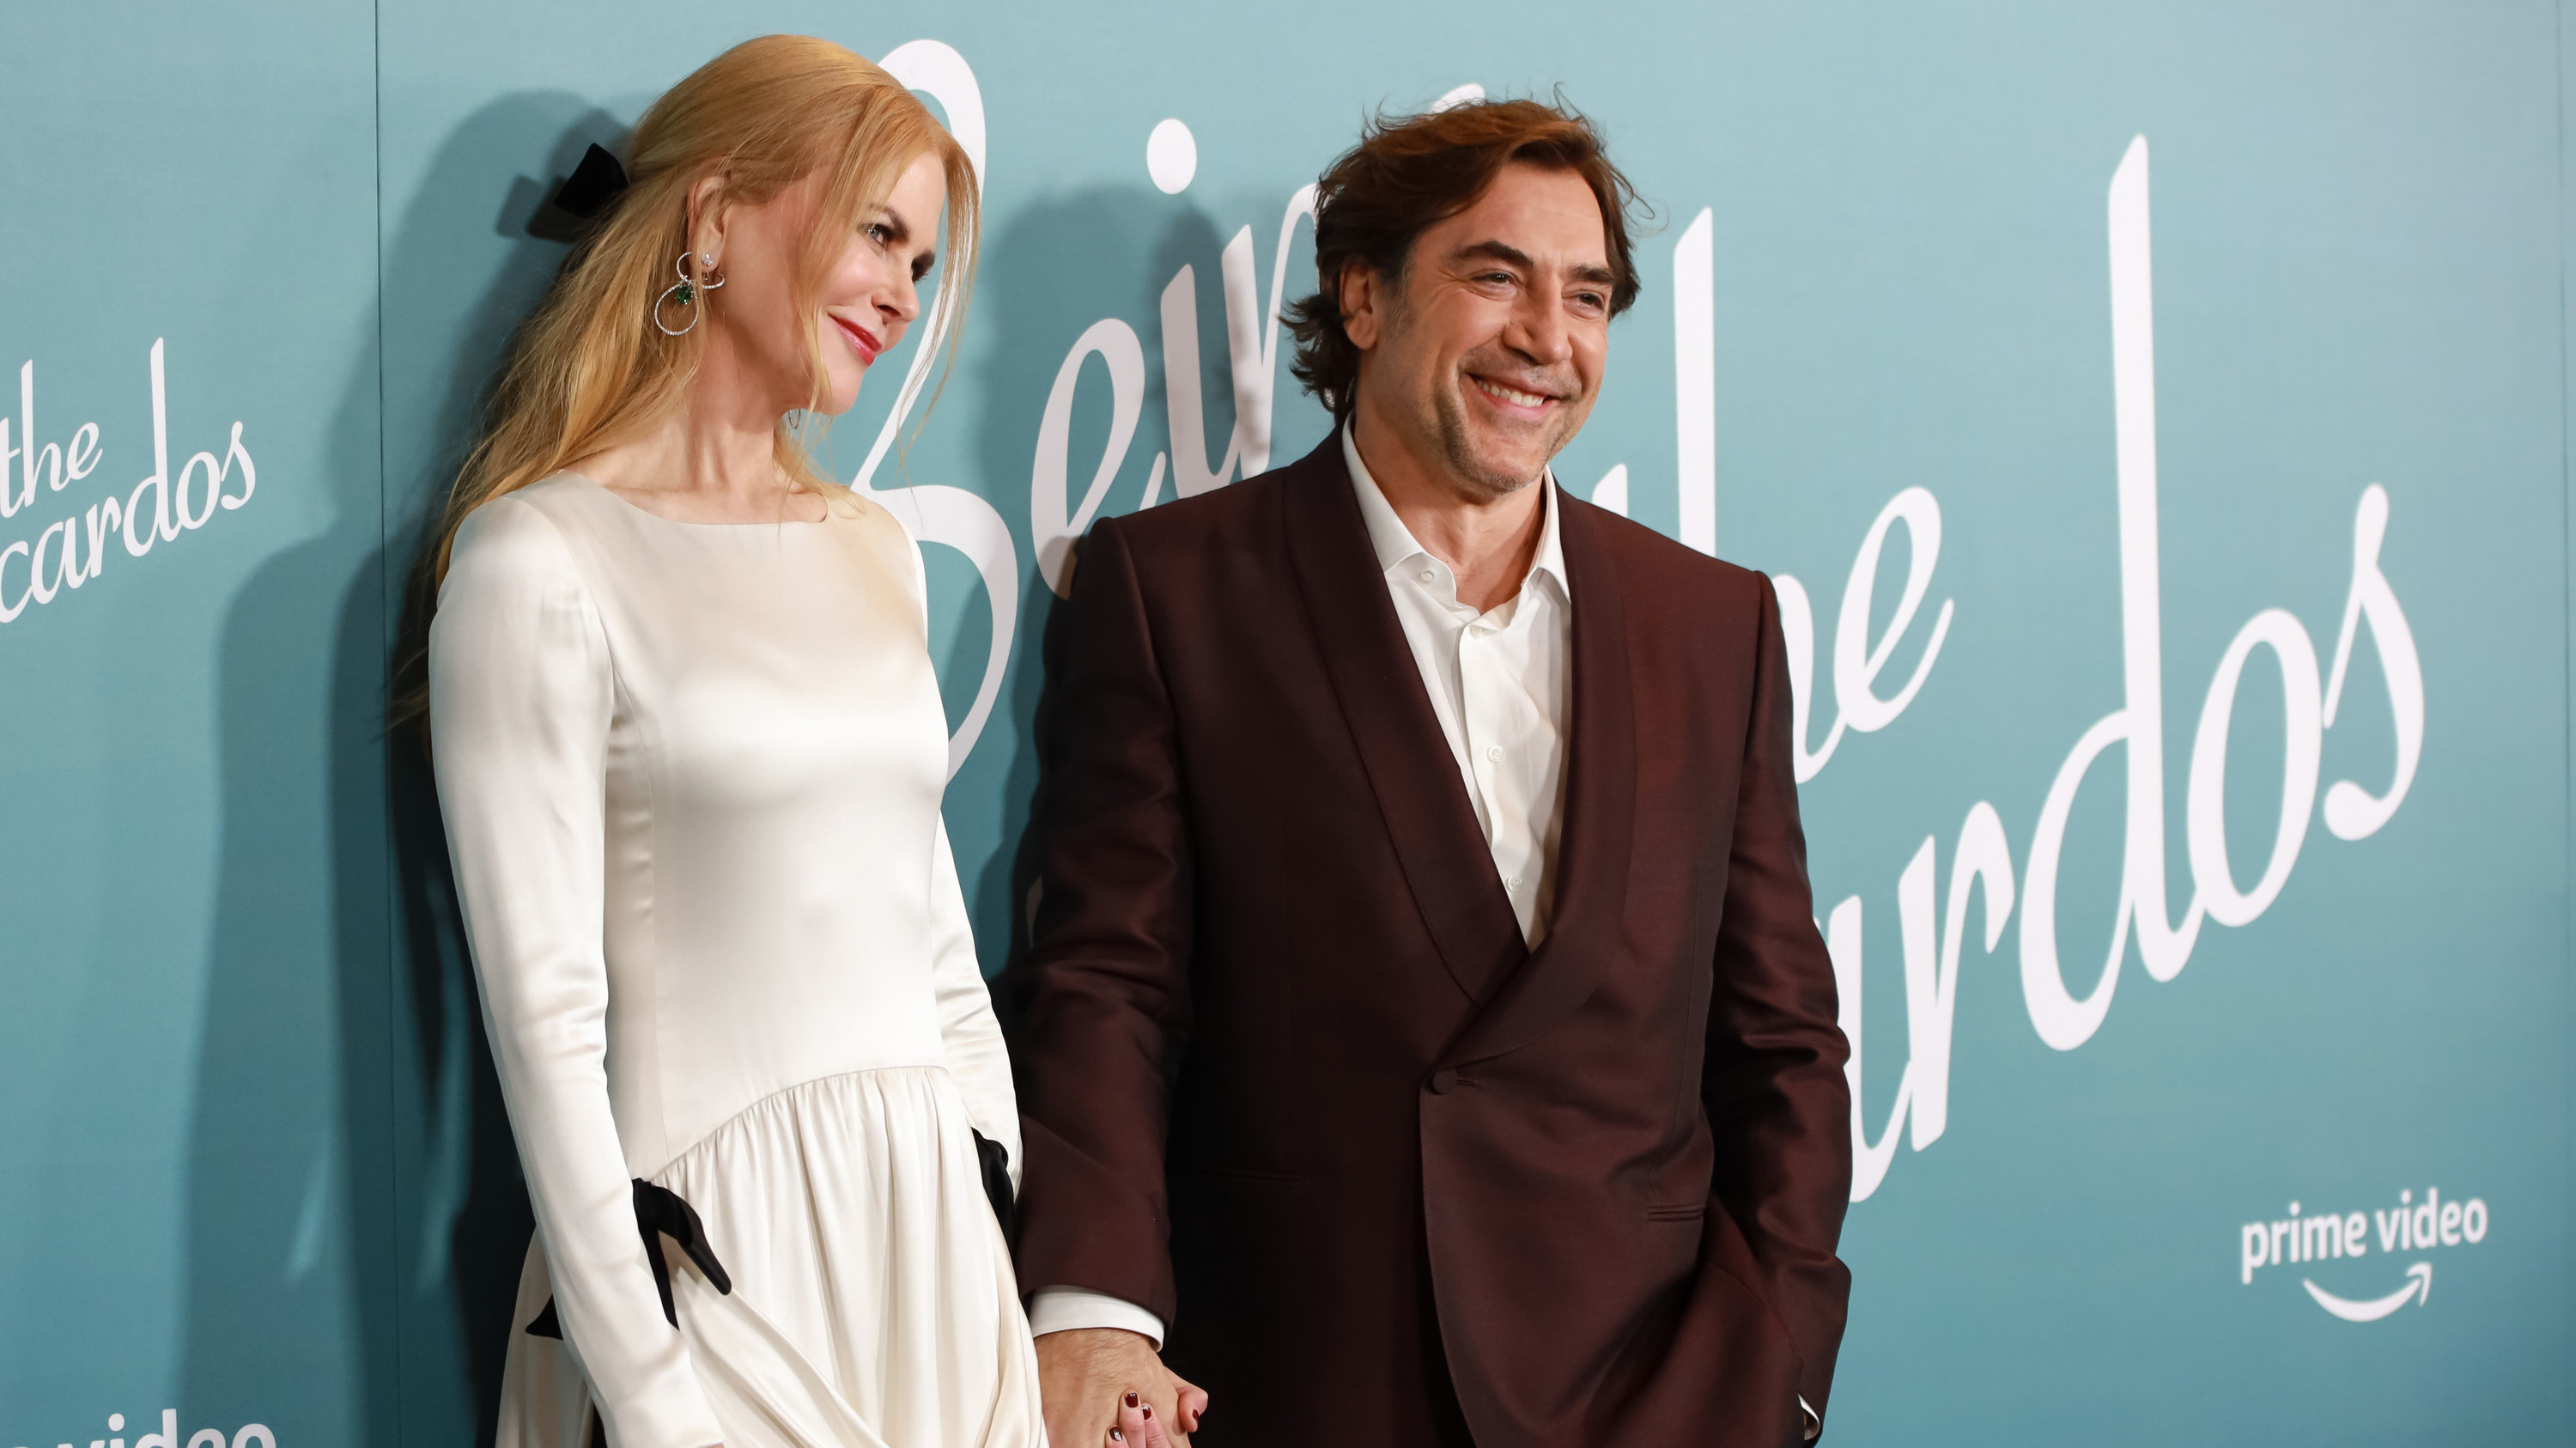 Nicole holding hands with her Being the Ricardos costar Javier Bardem at the premiere of their film